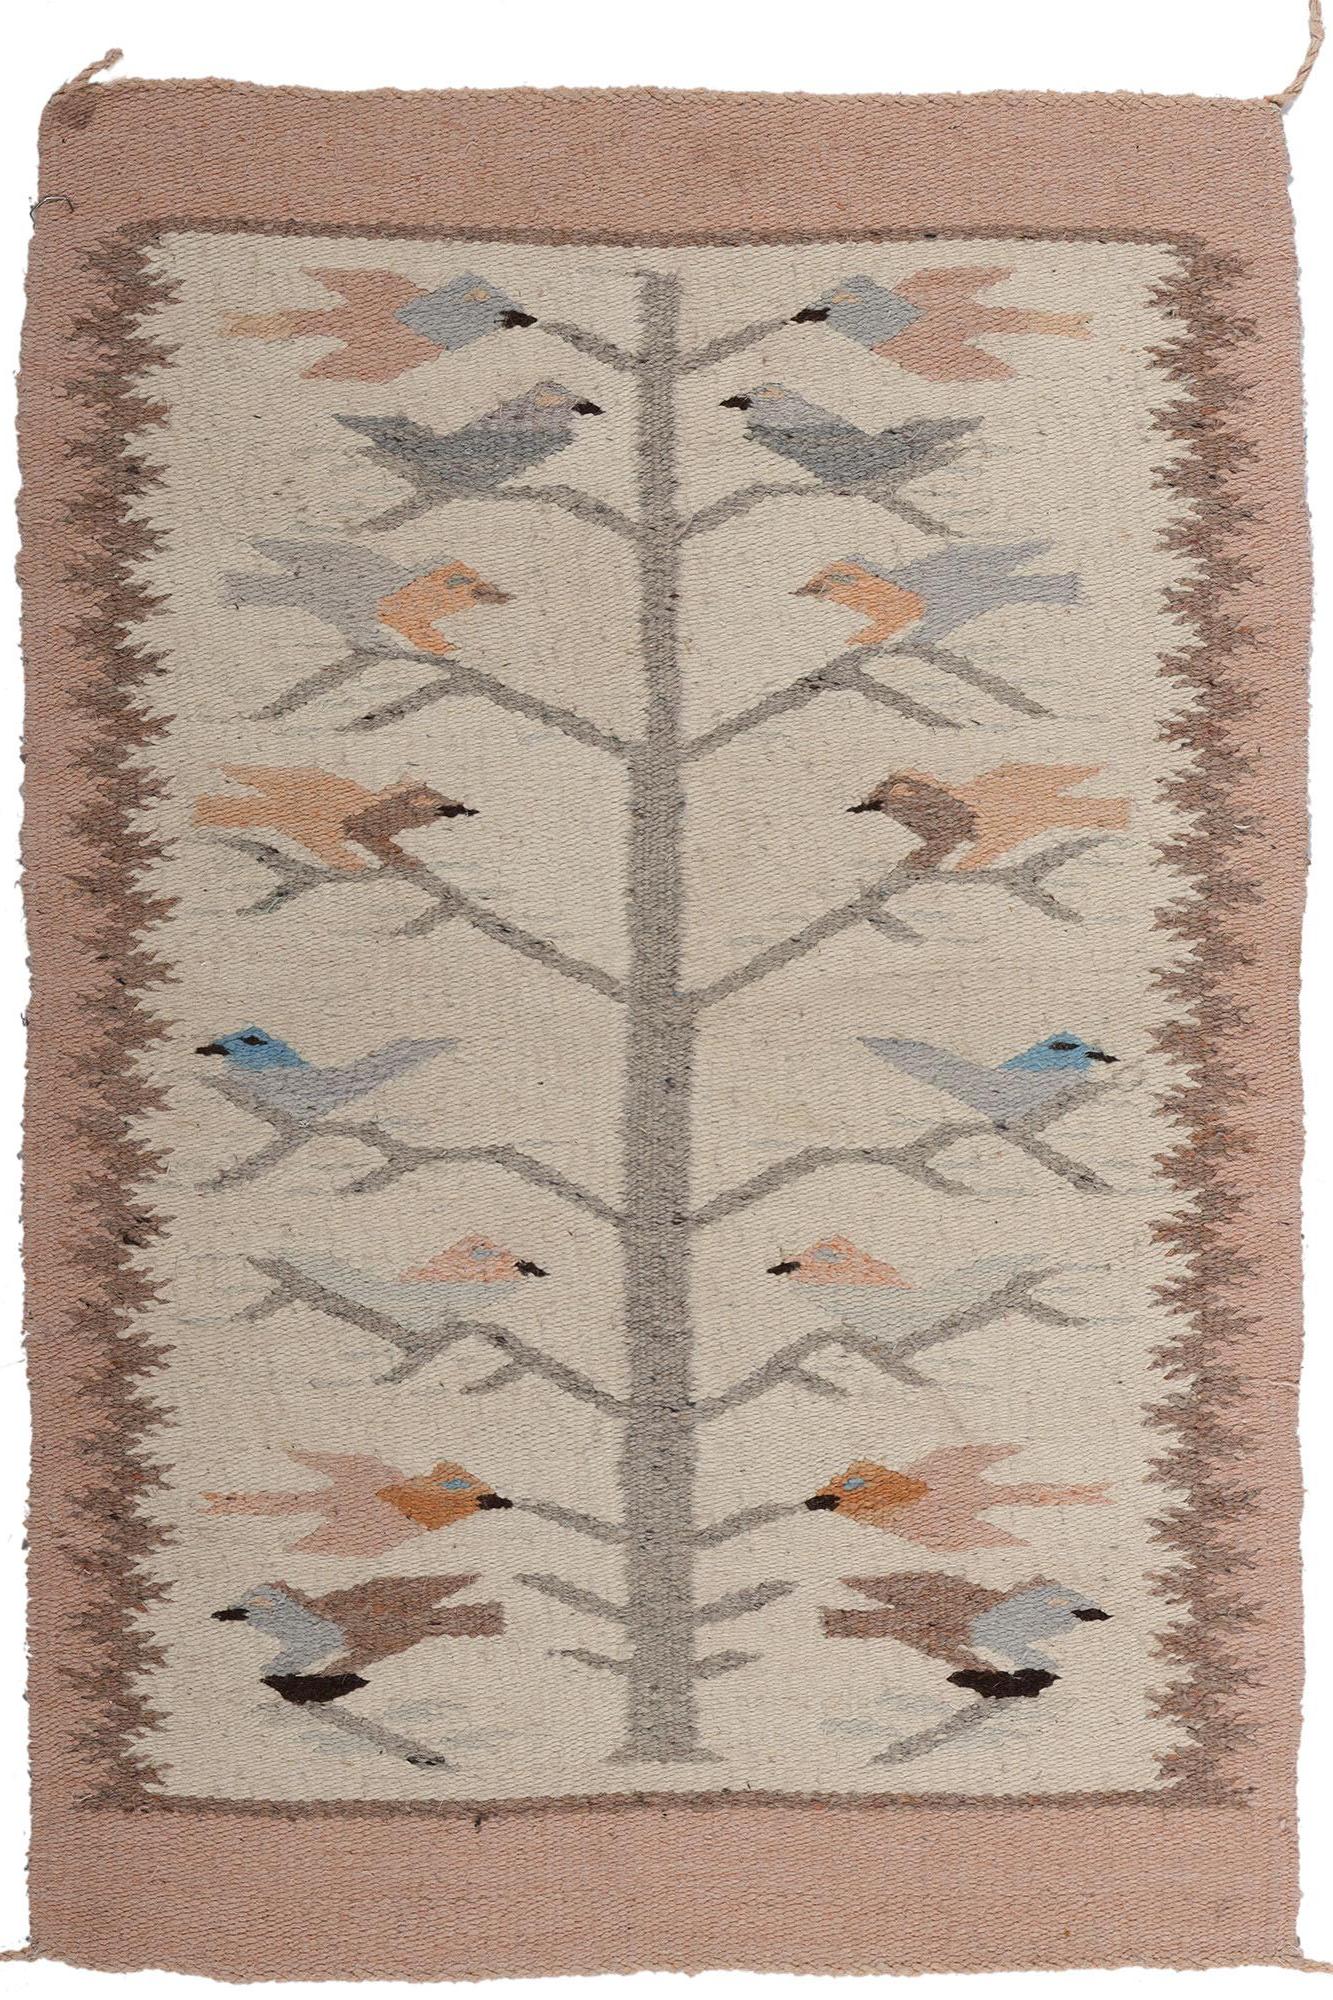 How much is a Navajo rug worth?